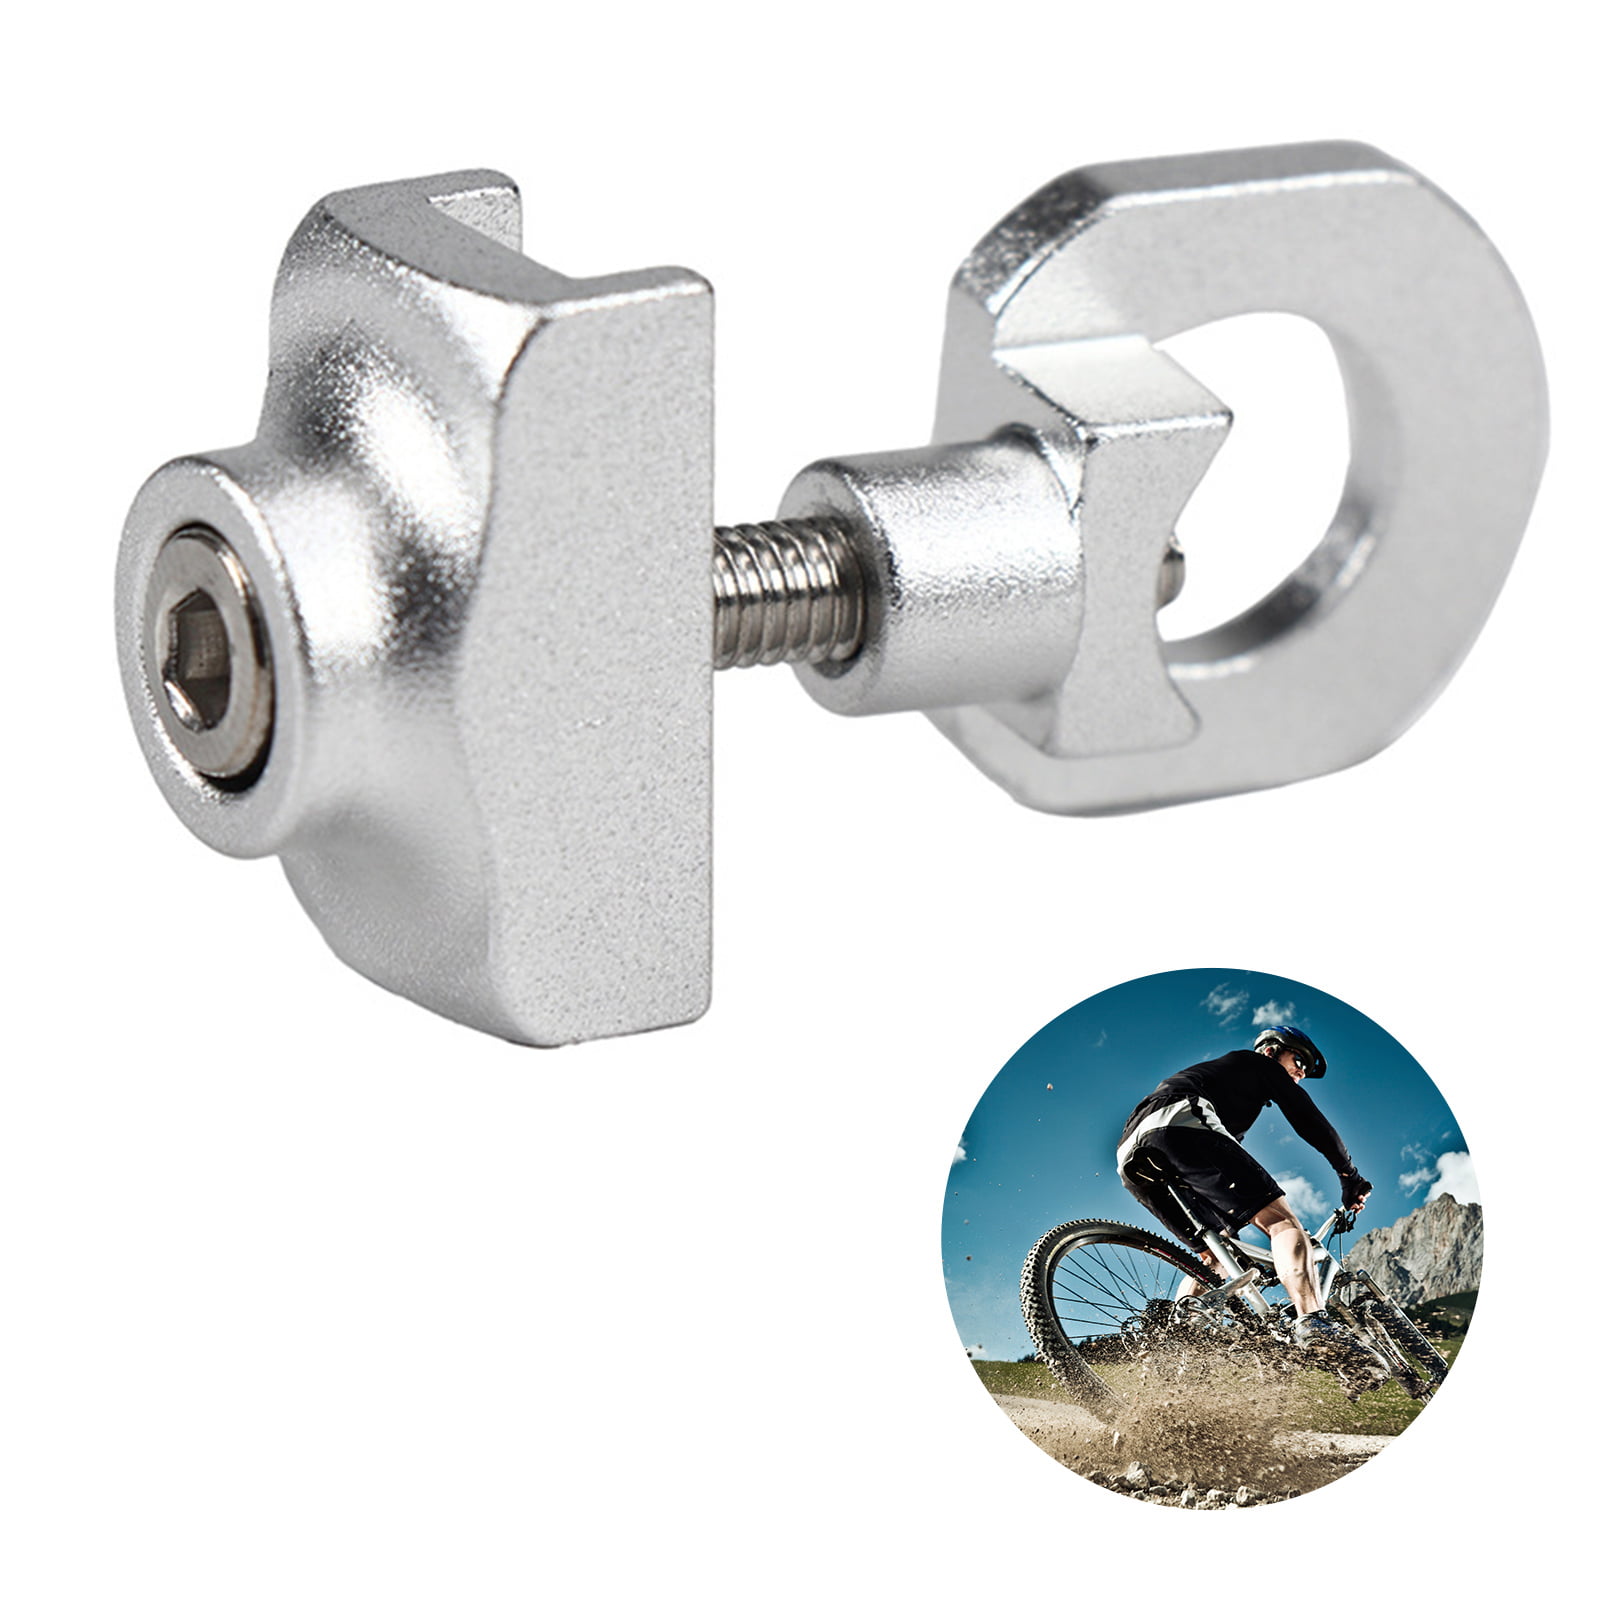 BMX Fixie Bike Bicycle Chain Adjuster Tensioner Fastener Aluminum Alloy Bolt New 